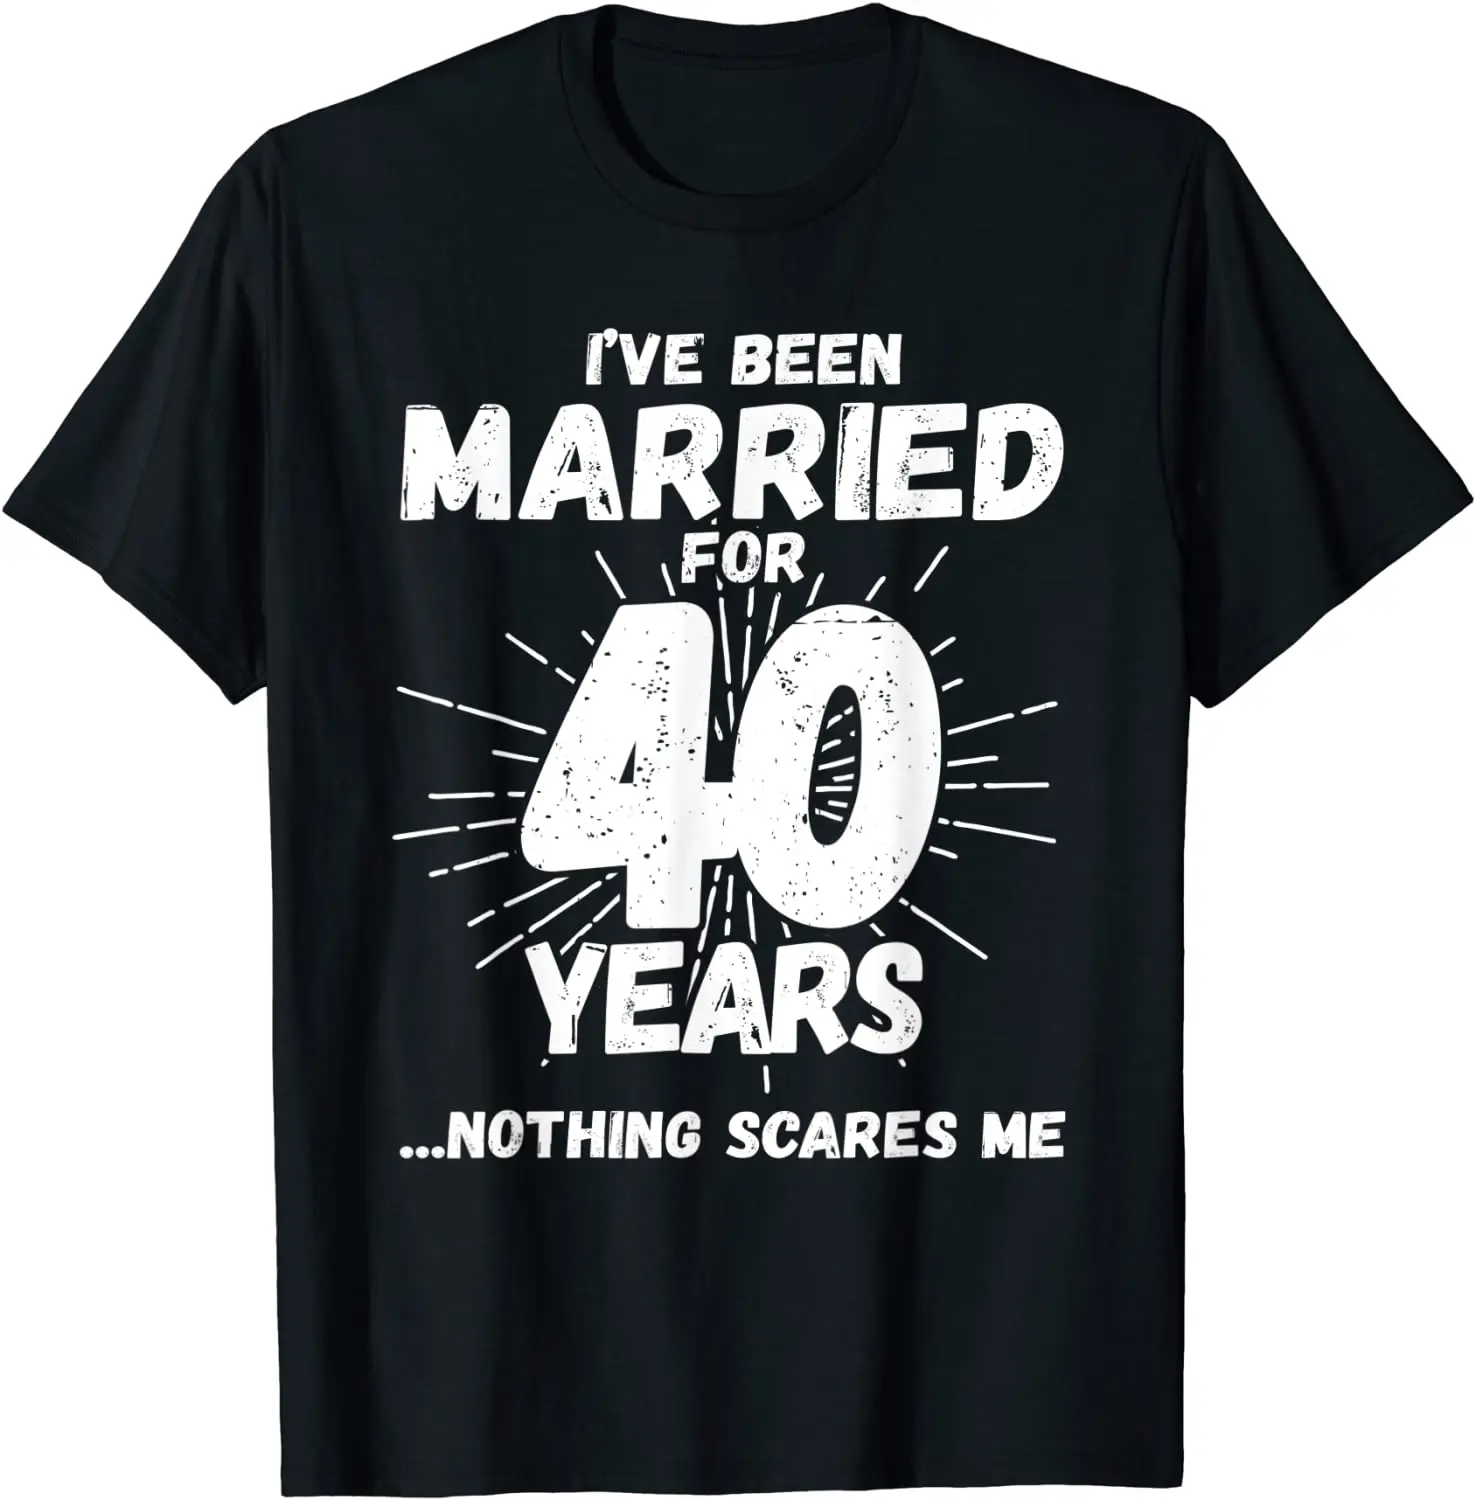 

Couples Married 40 Years - Funny 40th Wedding Anniversary T-Shirt Normal Summer Tops Shirts Dominant Cotton Mens T Shirt